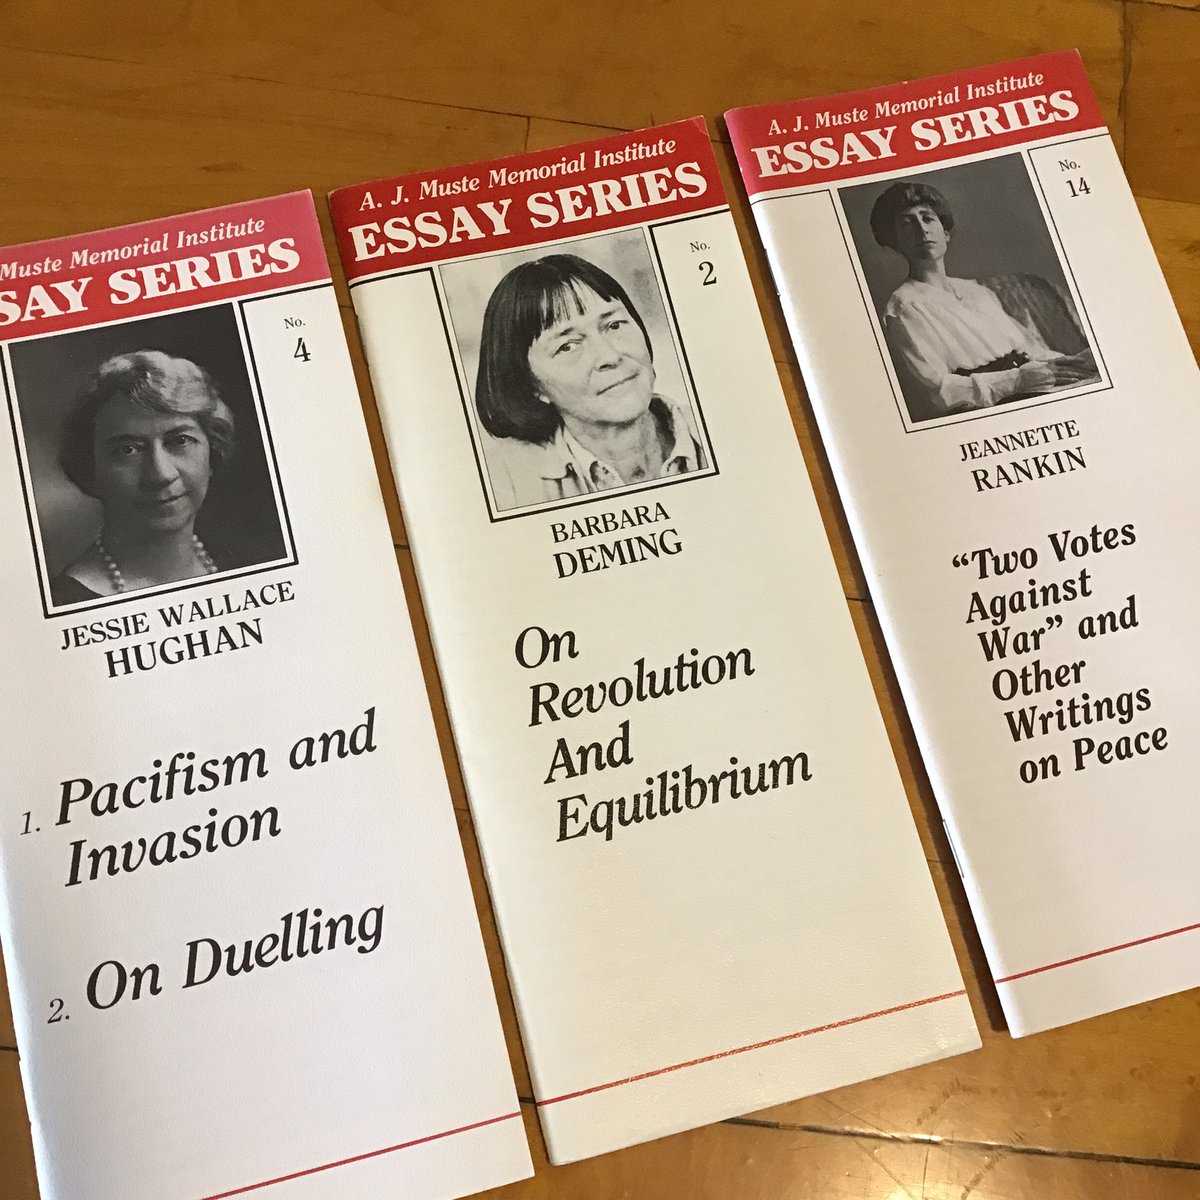 We dug up some vintage booklets, including these gems by #emmagoldman & #rosaluxemburg ! Supplies are limited & they’re only $1, so get ‘em while you can! burningbooks.com/collections/a-…